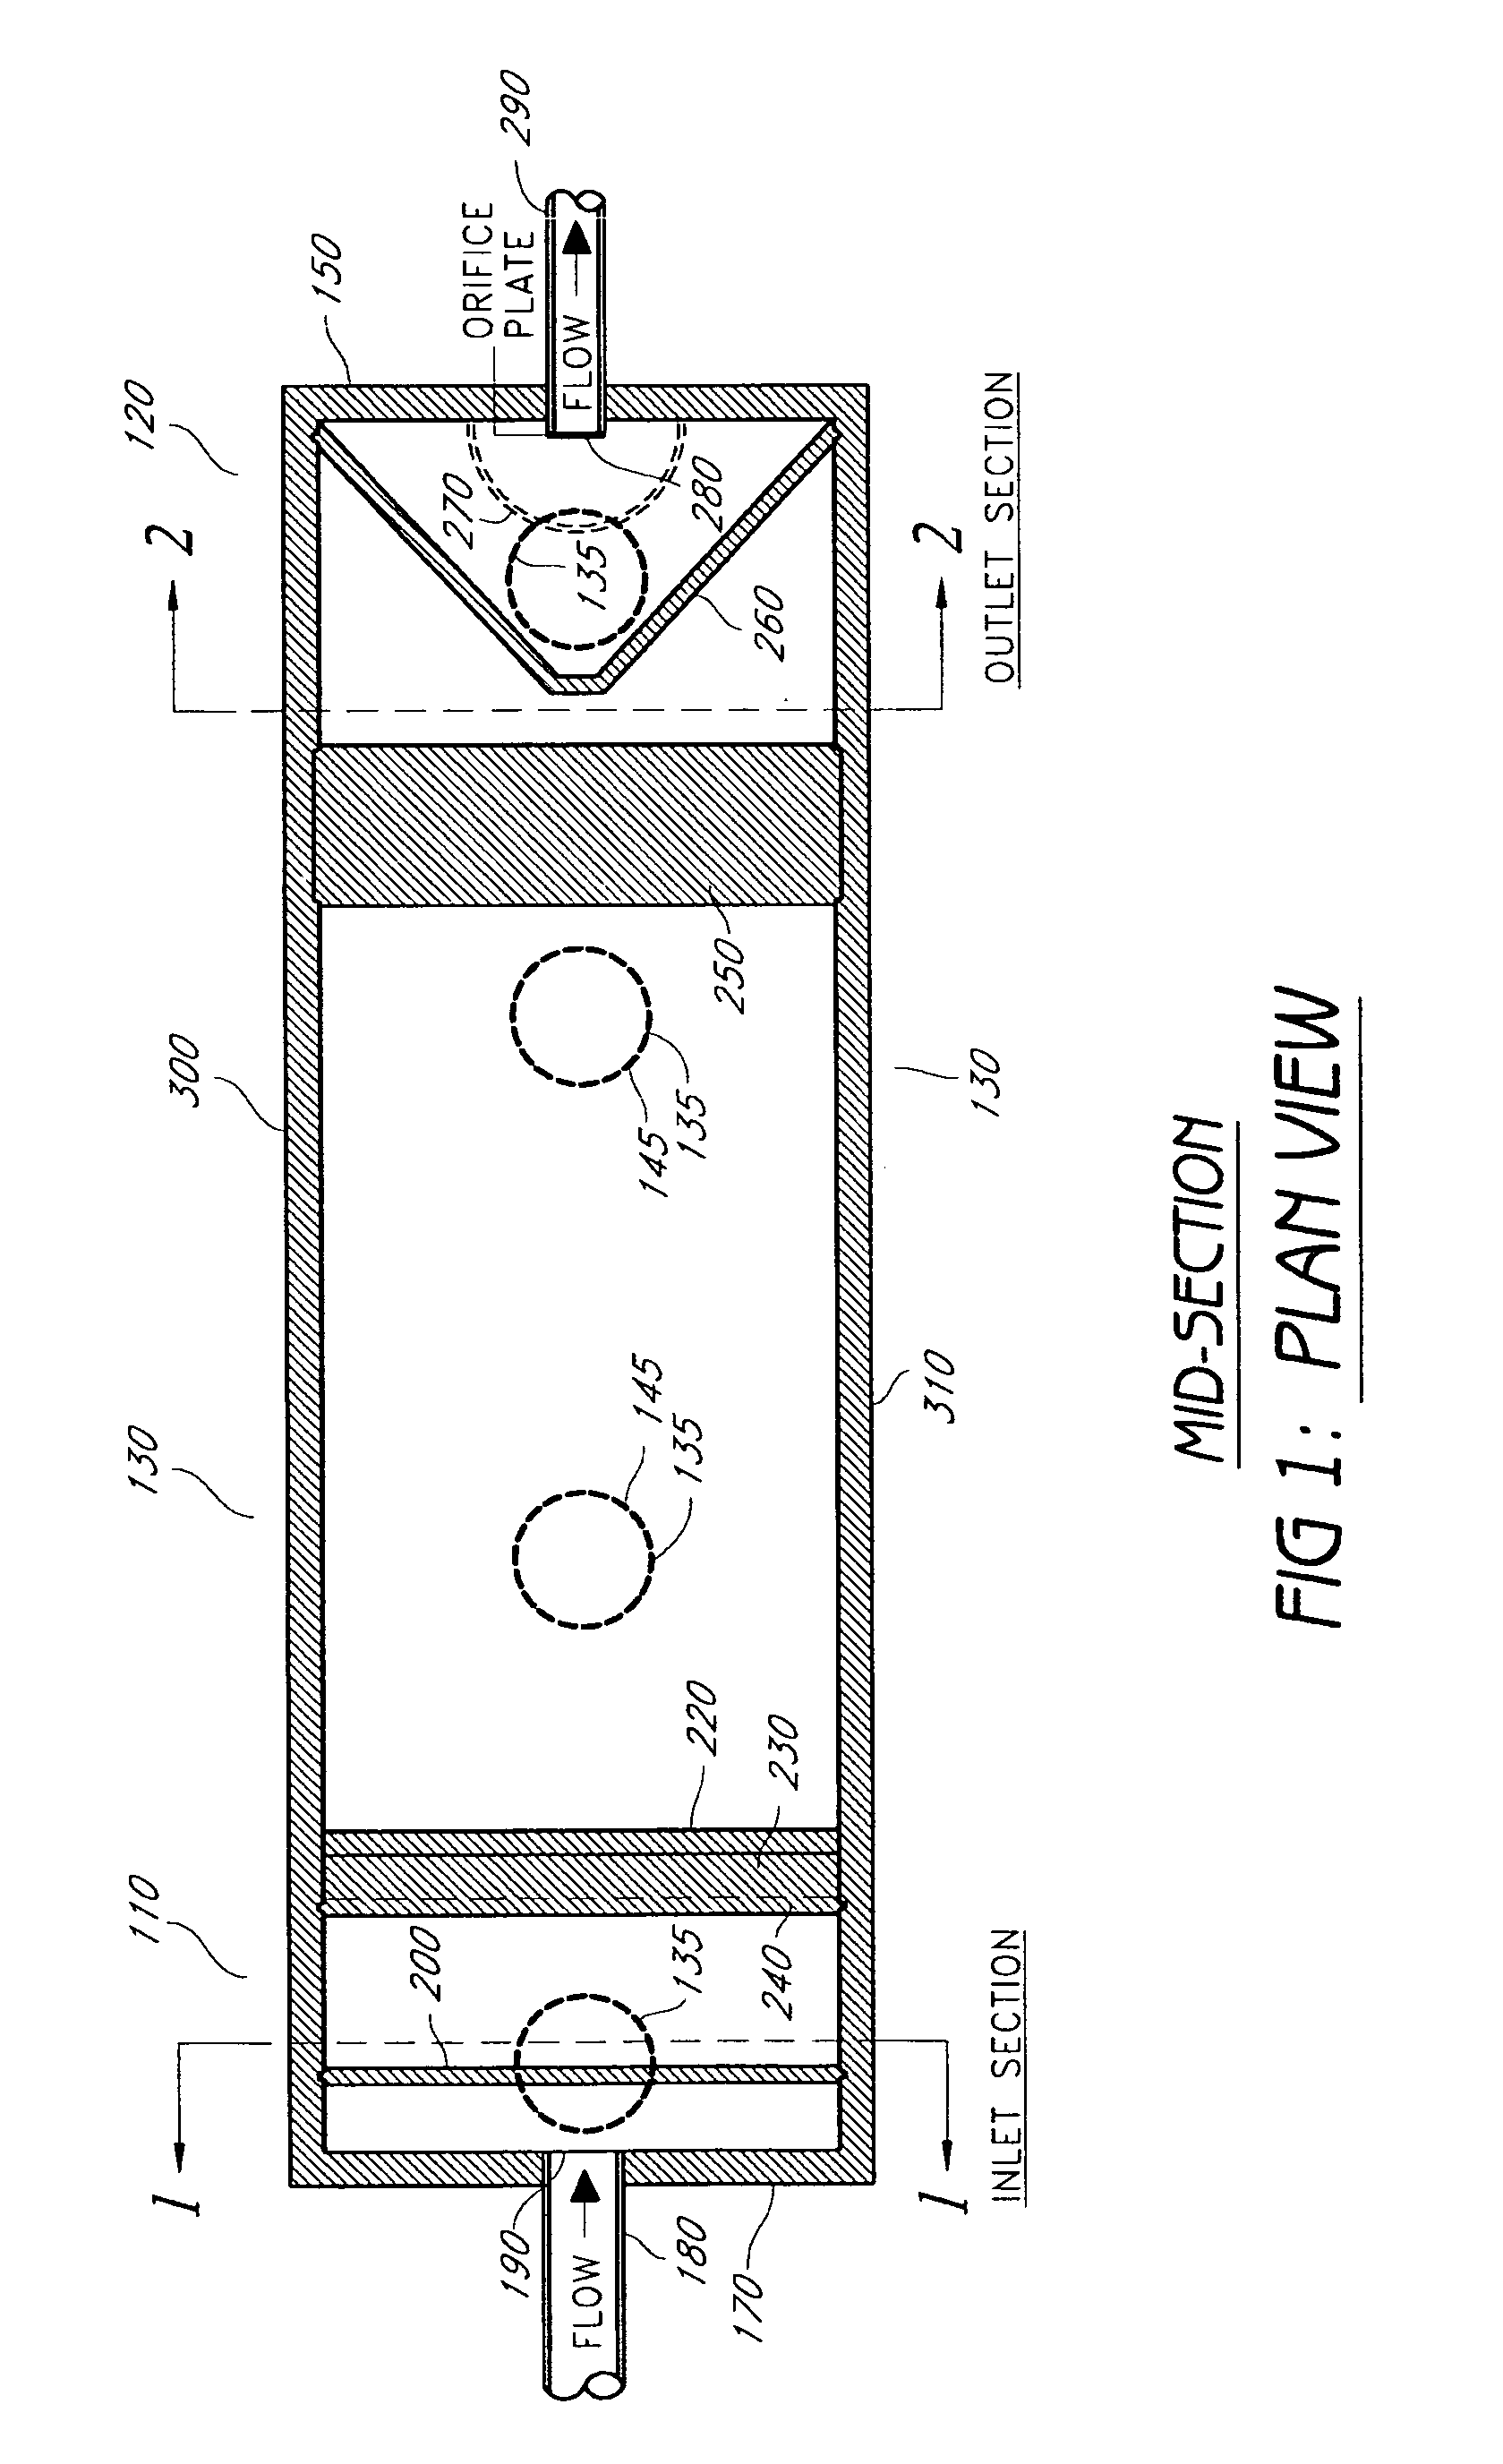 Stormwater treatment apparatus and method